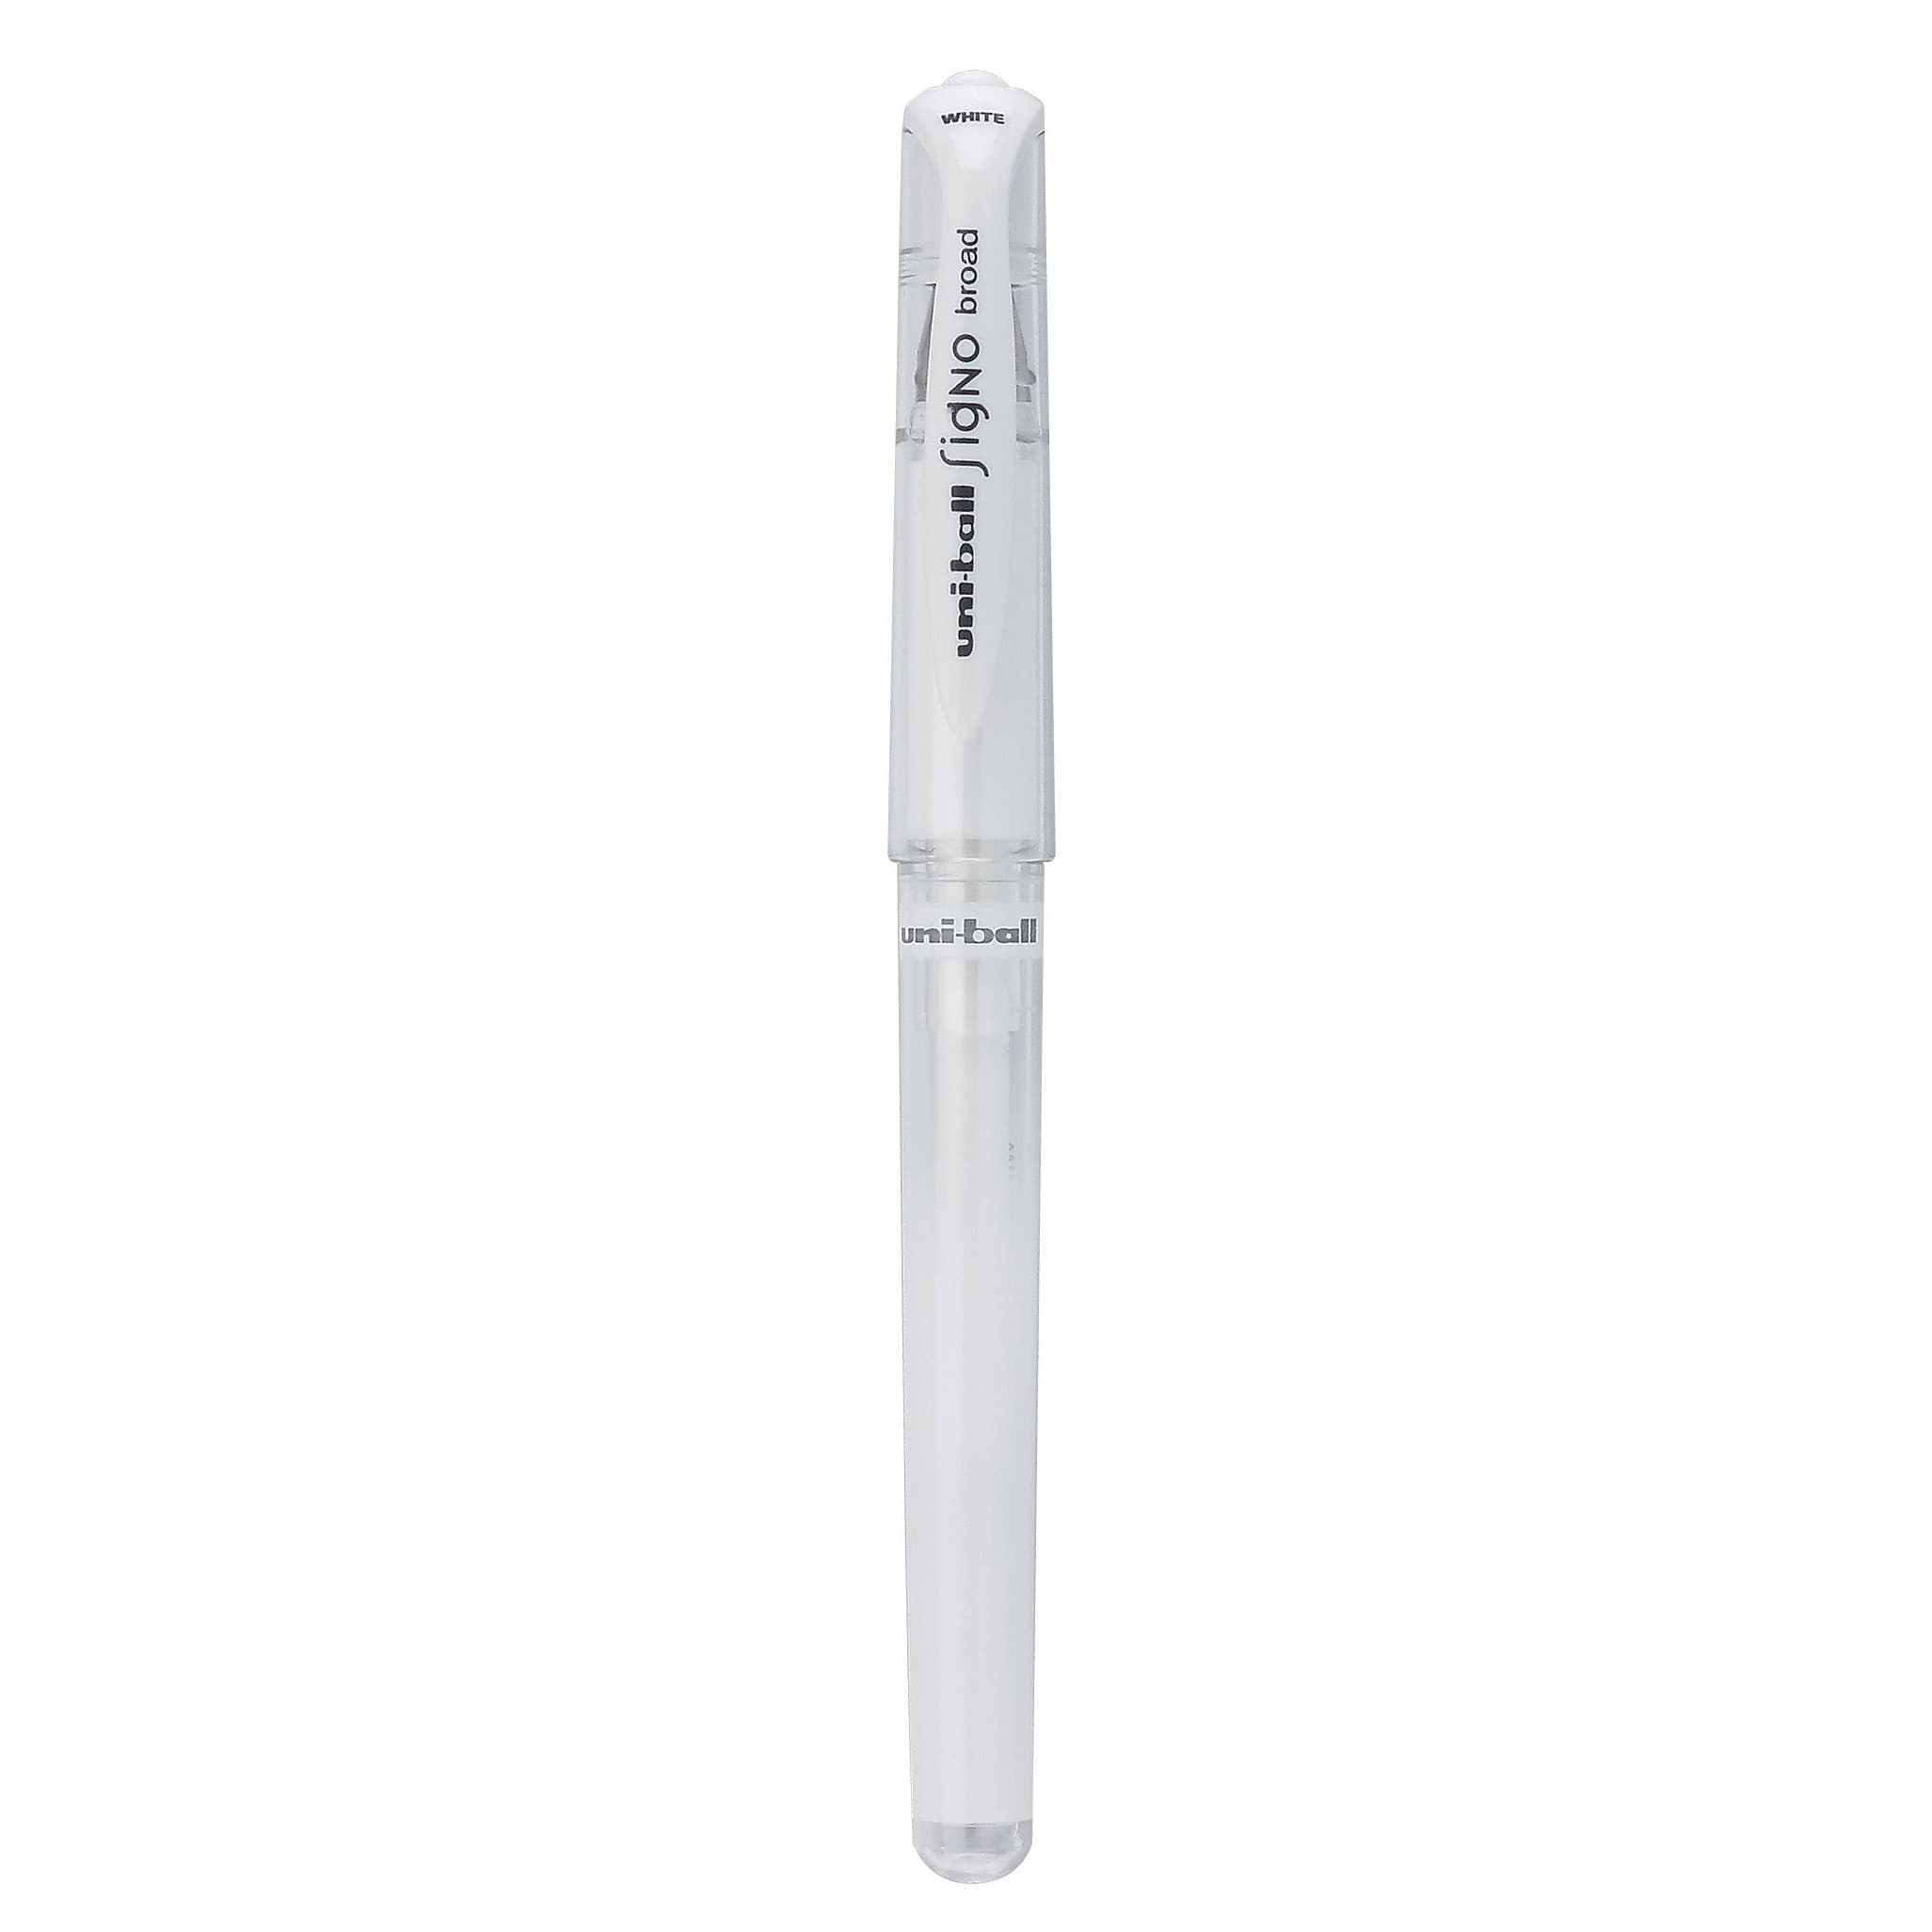  Uni-Ball Signo UM-153 Gel Ink Rollerball Pen, 1.0mm, Broad  Point, White, Black and Silver Set of 3 : Office Products